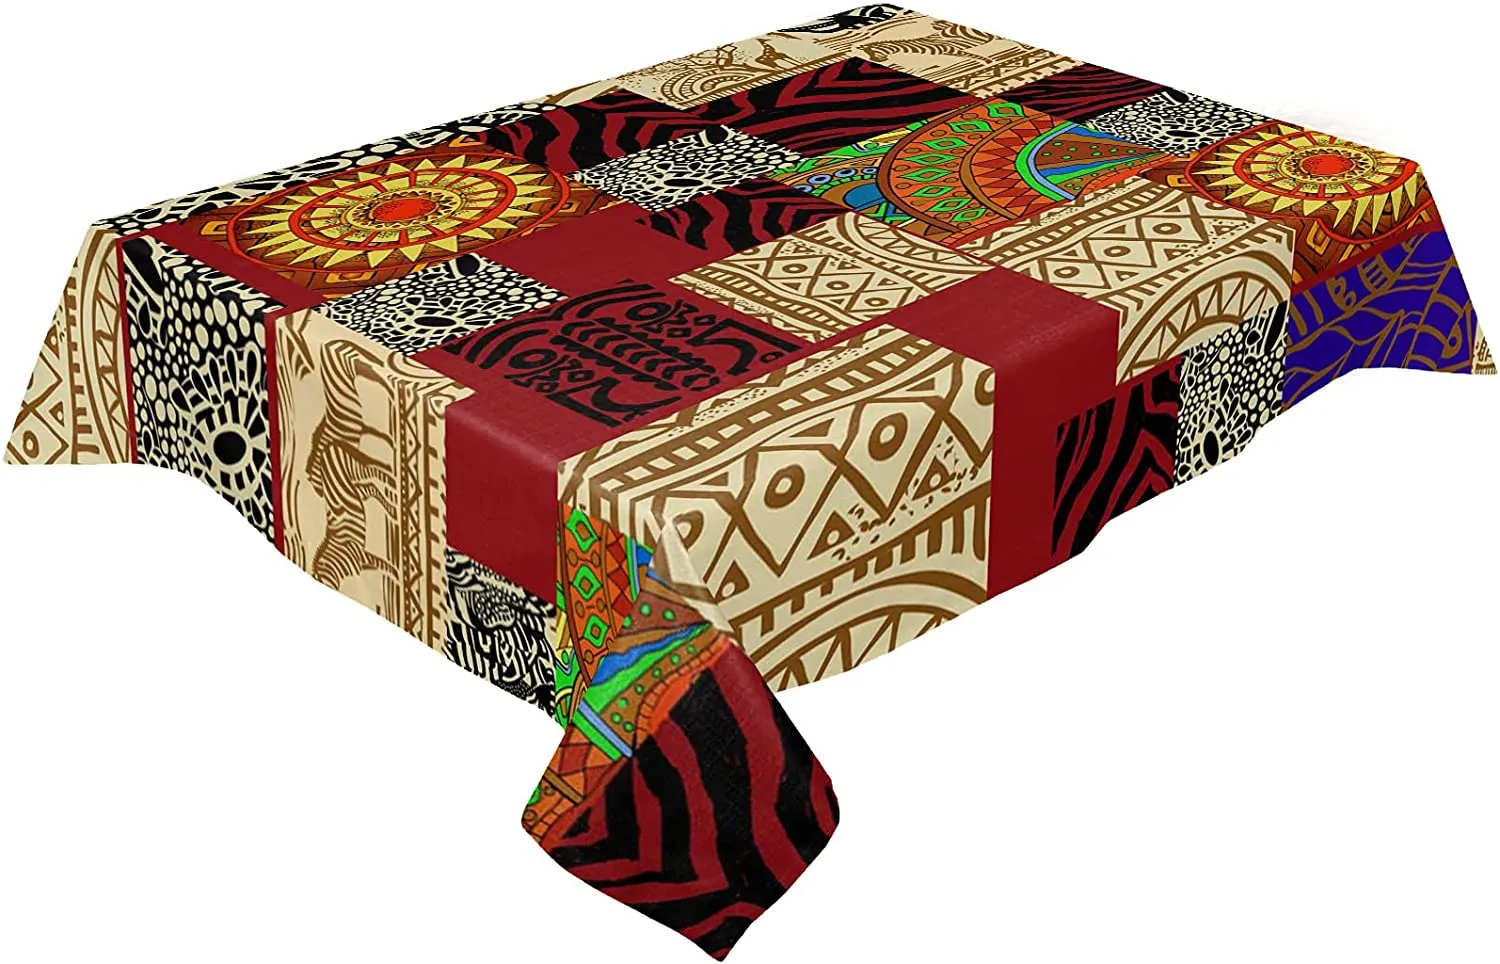 African Ethnic Ornaments Giraffe Rectangle Tablecloth Kitchen Table Decor Reusable Waterproof Table Covers Wedding Decorations